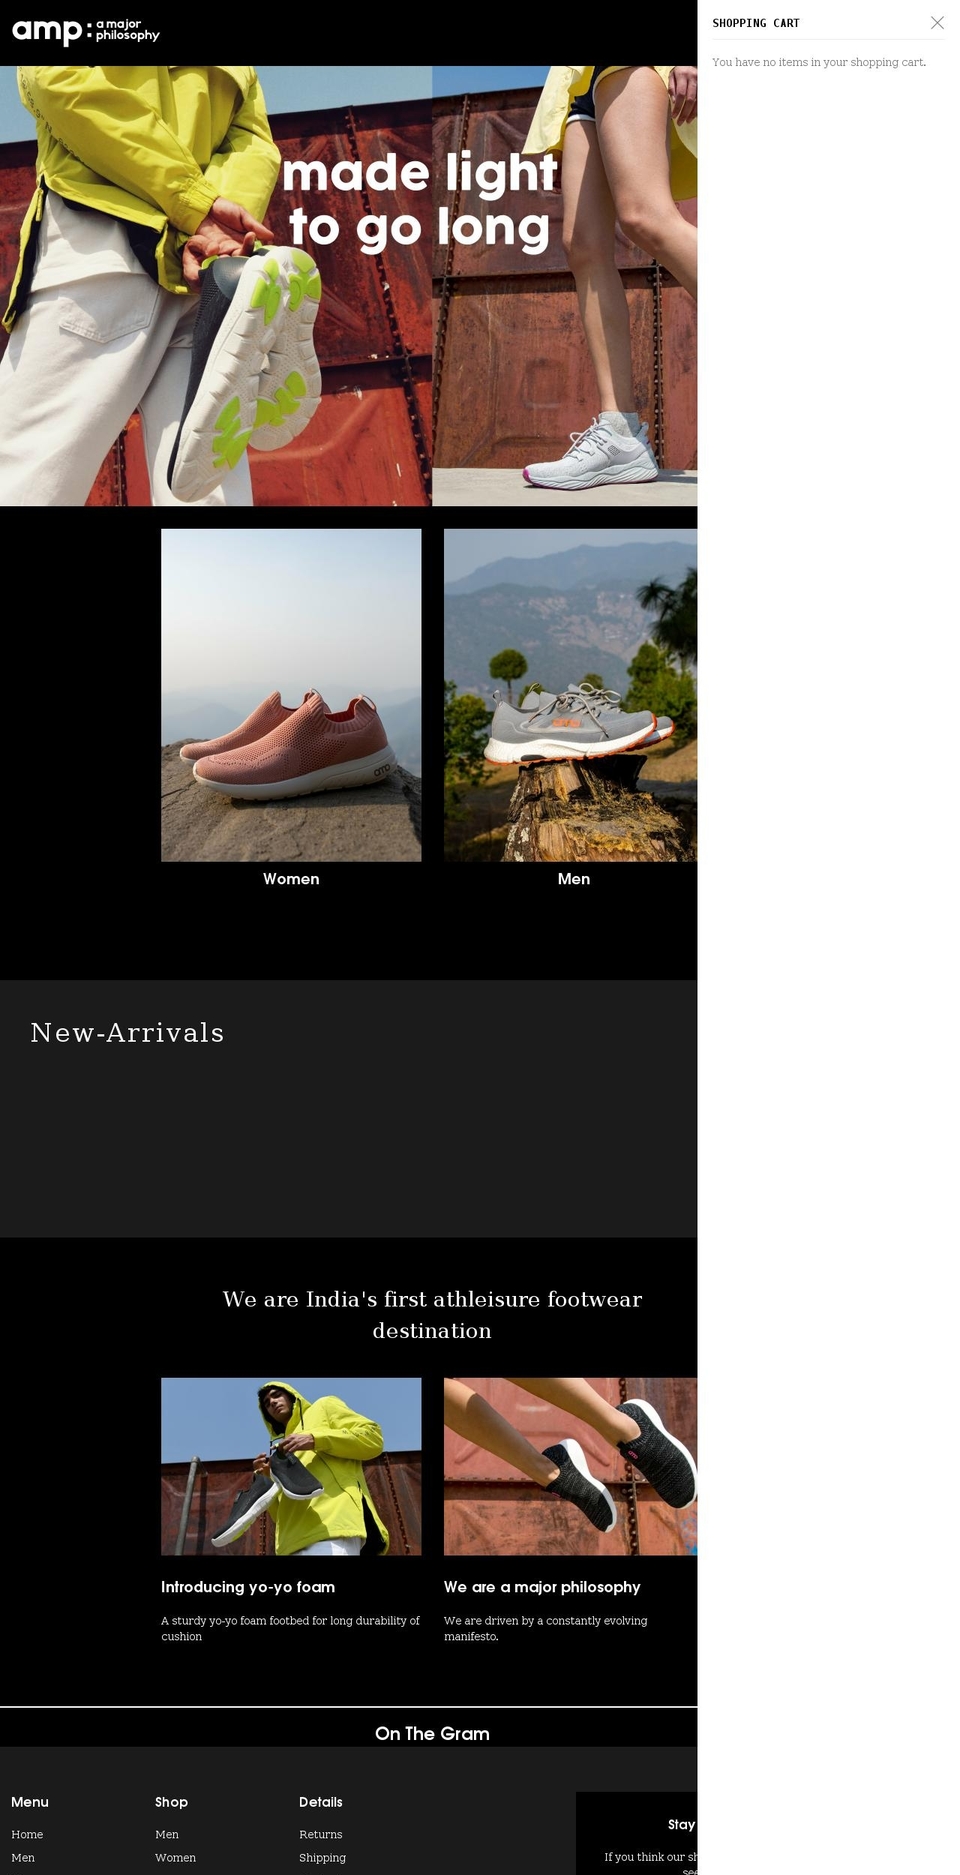 shoes Shopify theme site example ampshoes.com